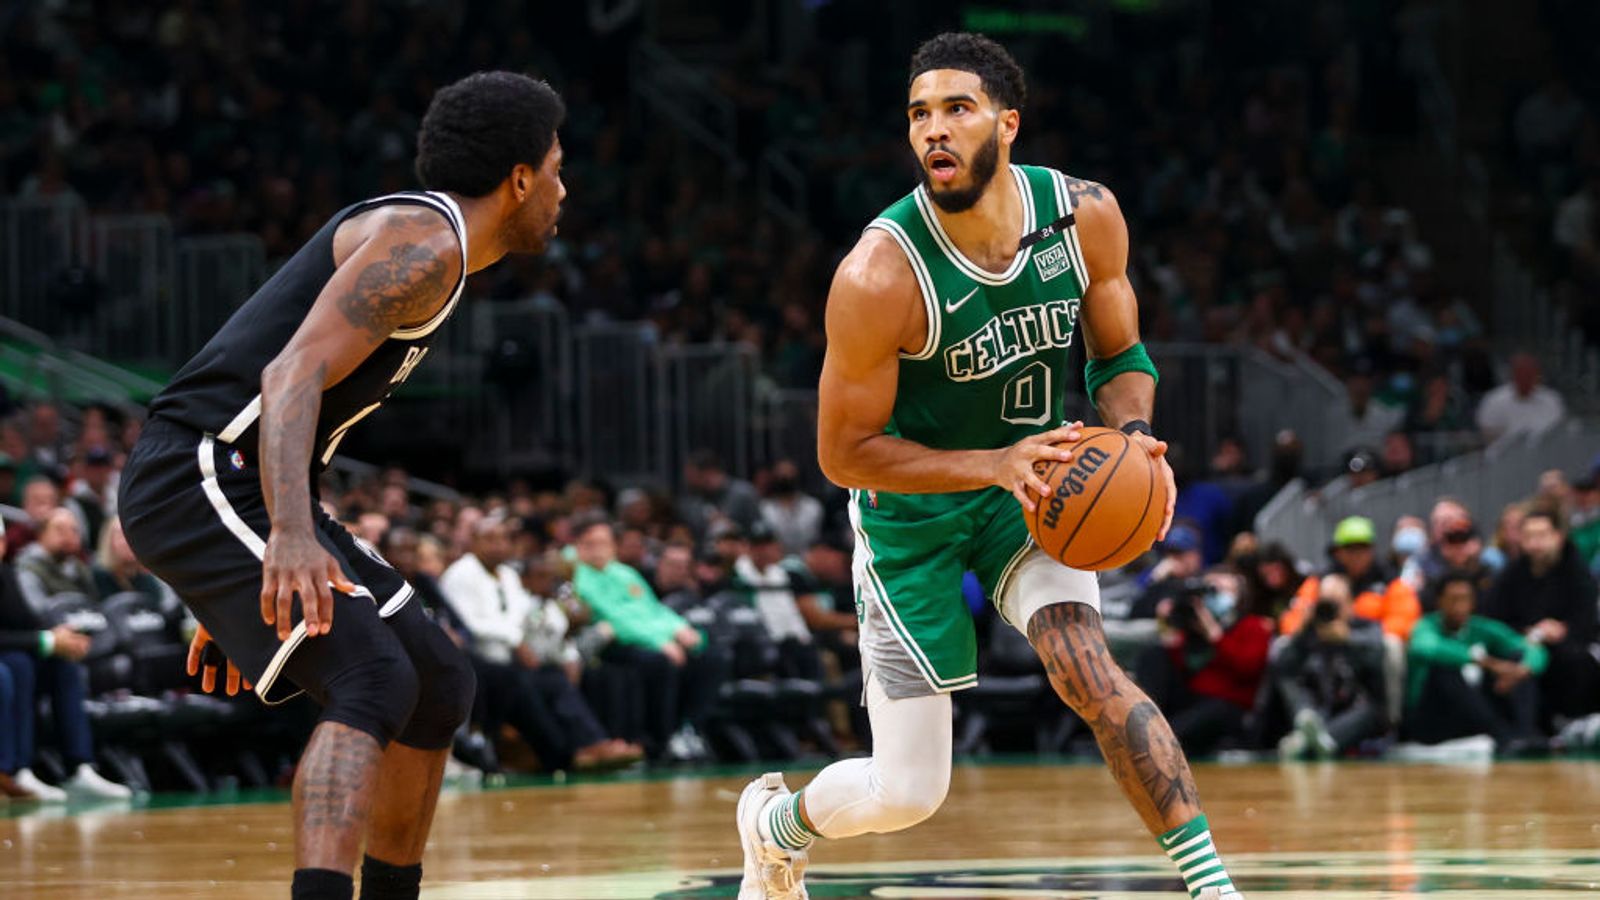 Video breakdown: How the Celtics offense can pick on Kyrie Irving